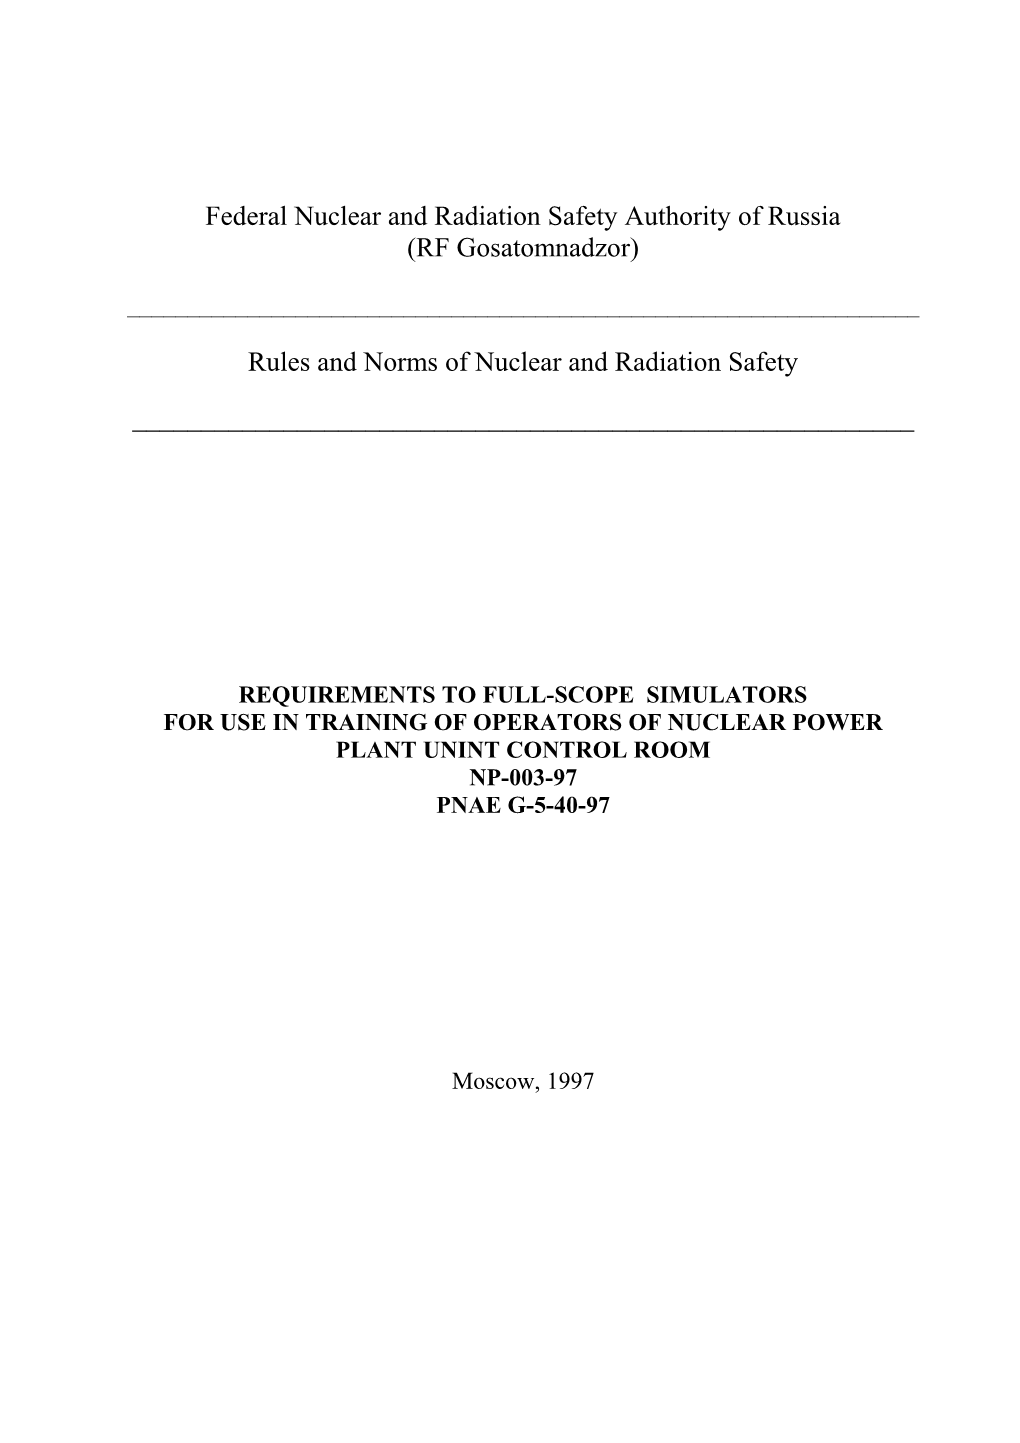 Federal Authority of Russia for Nuclear and Radiation Safety